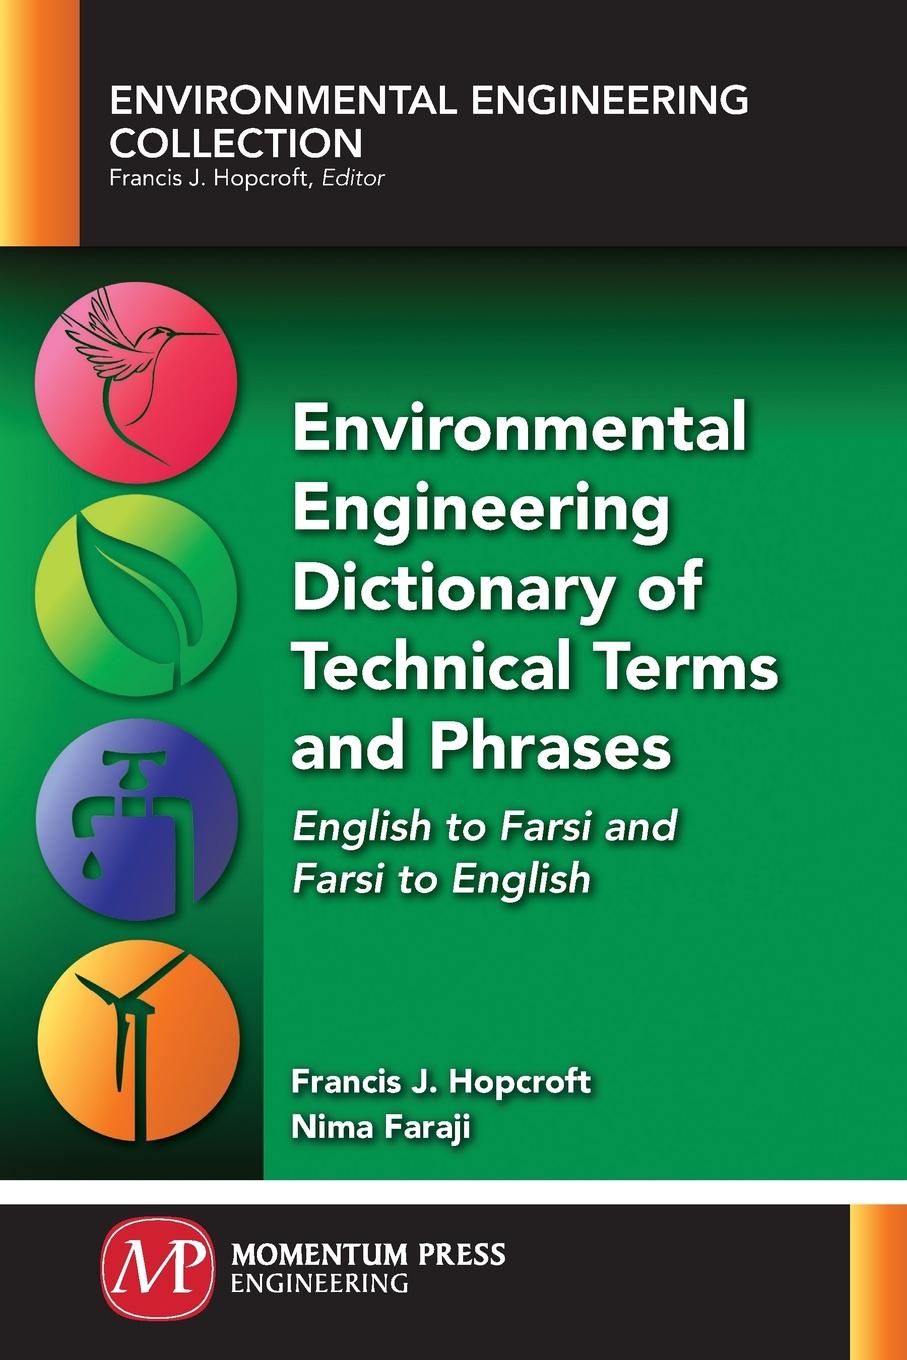 Environmental Engineering Dictionary of Technical Terms and Phrases. English to Farsi and Farsi to English